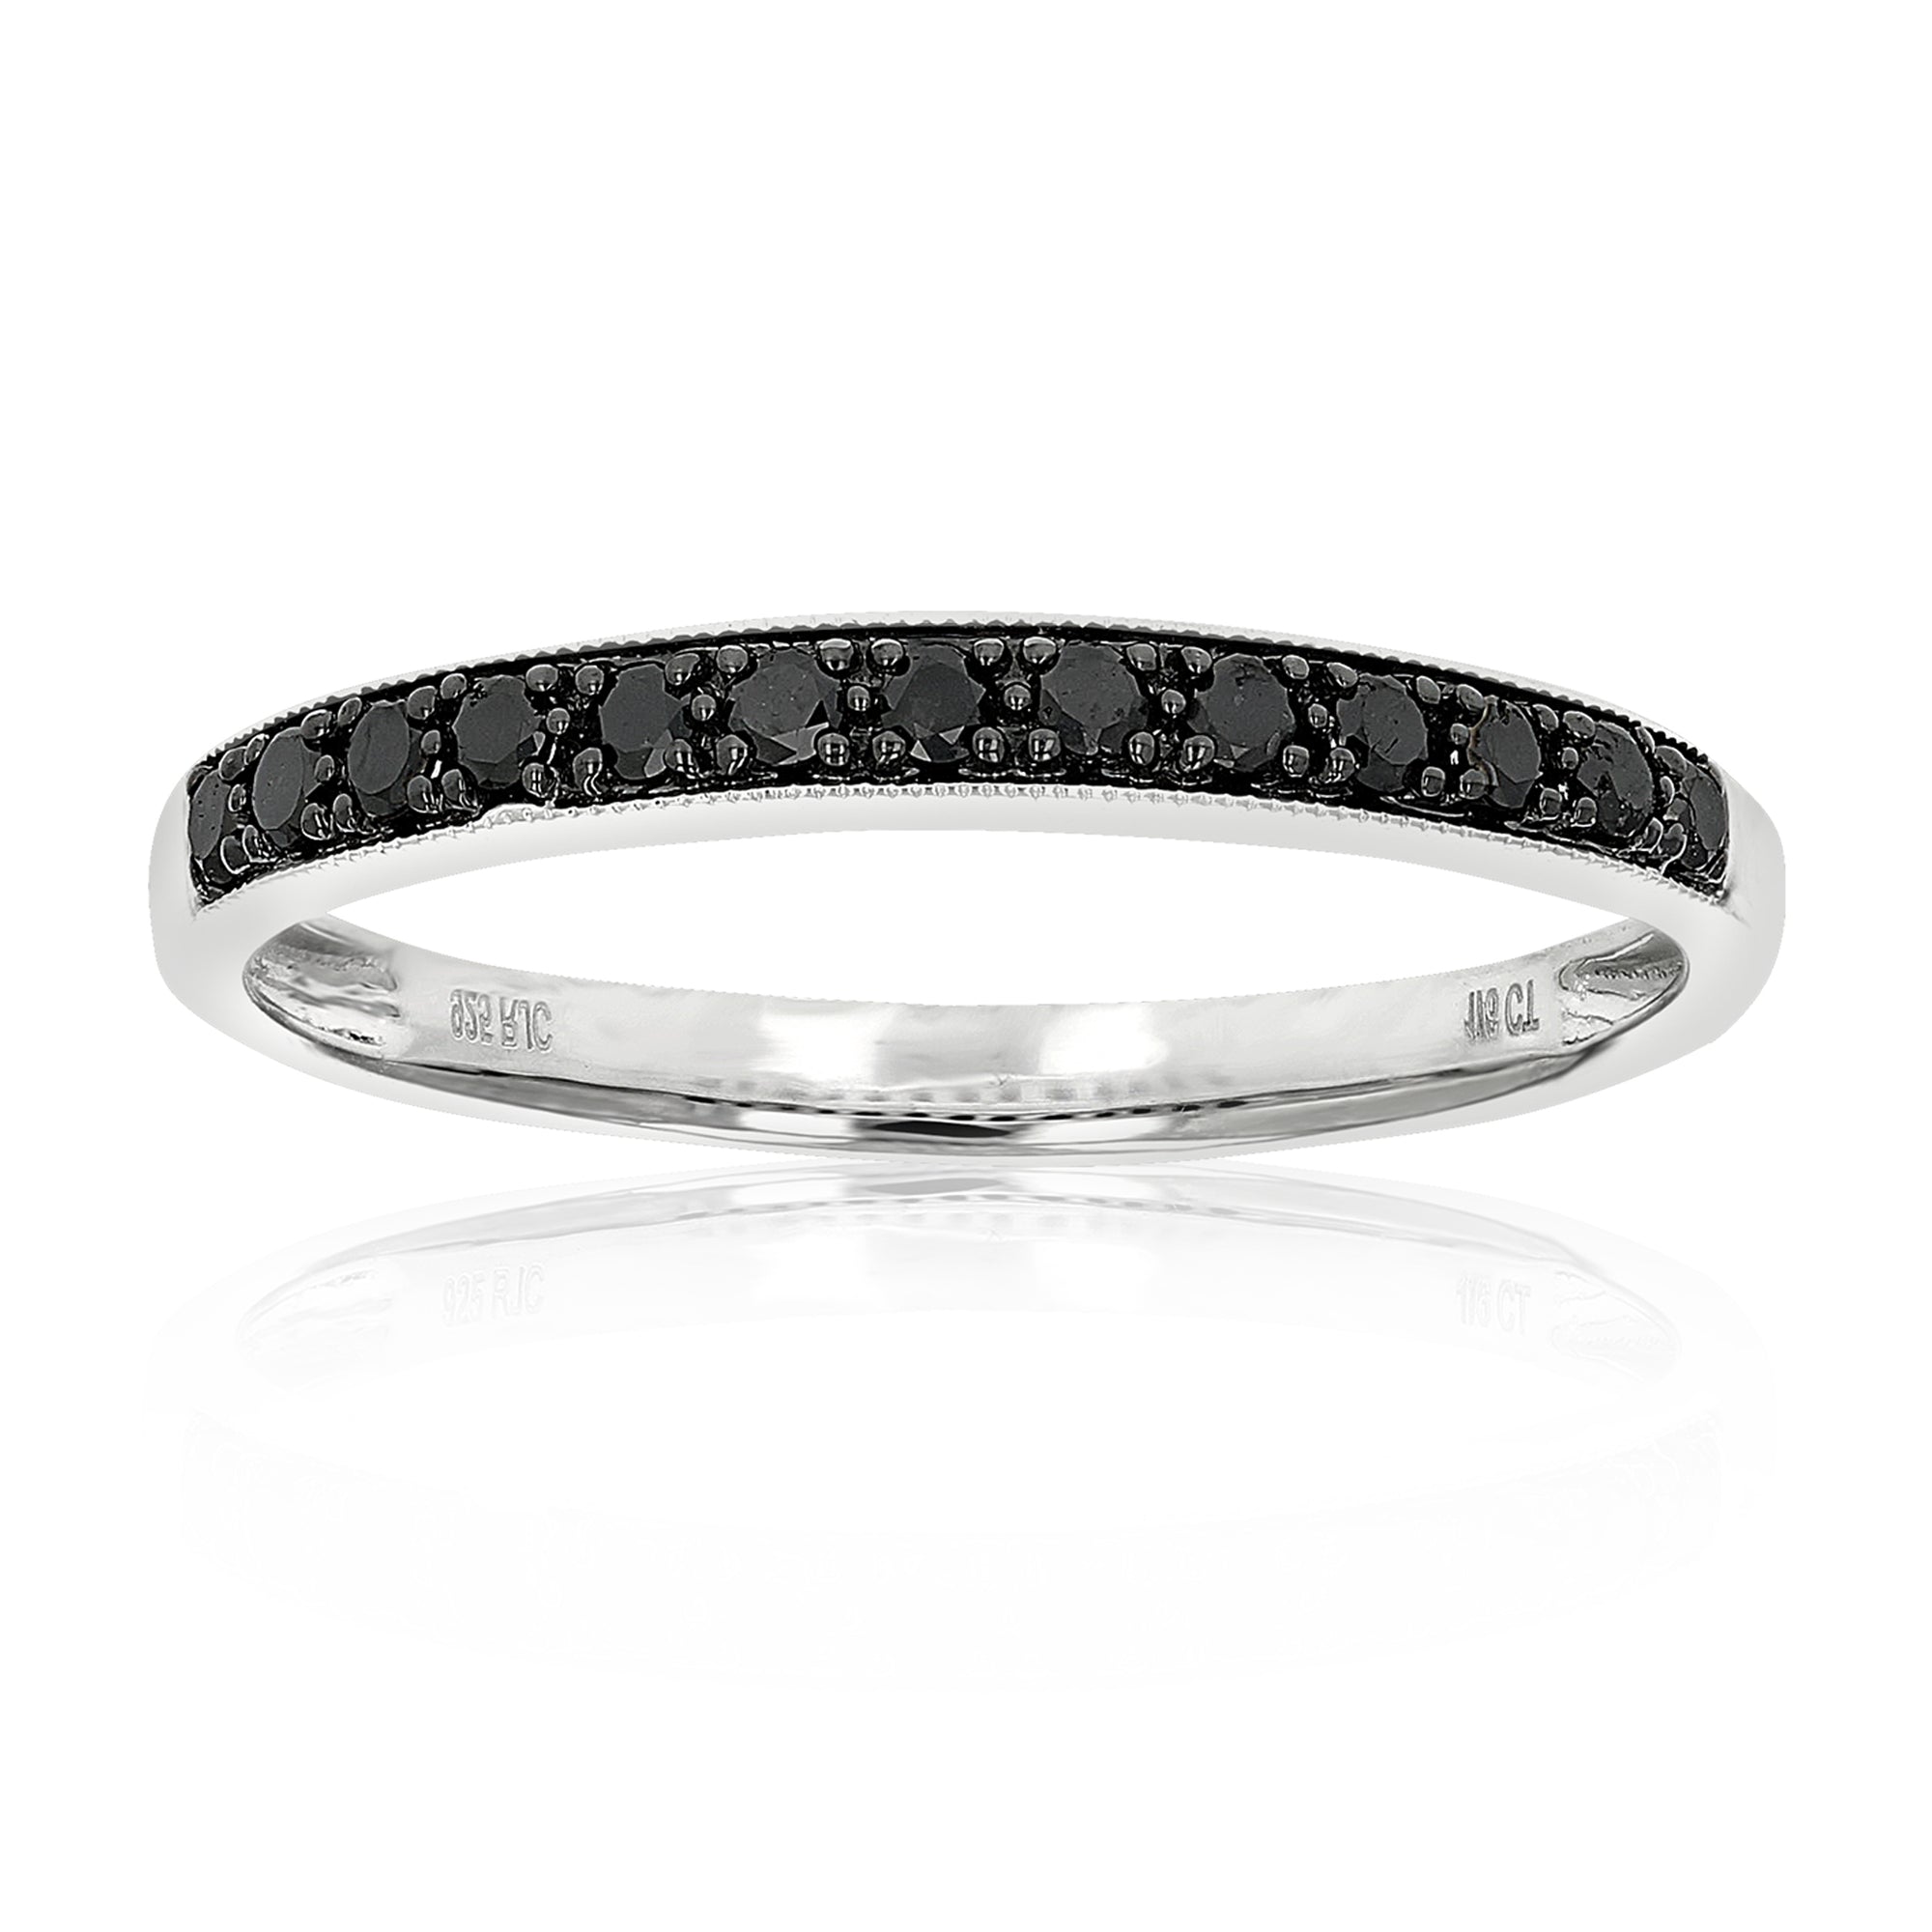 1/6 cttw Black Diamond Wedding Band in .925 Sterling Silver with Milgrain